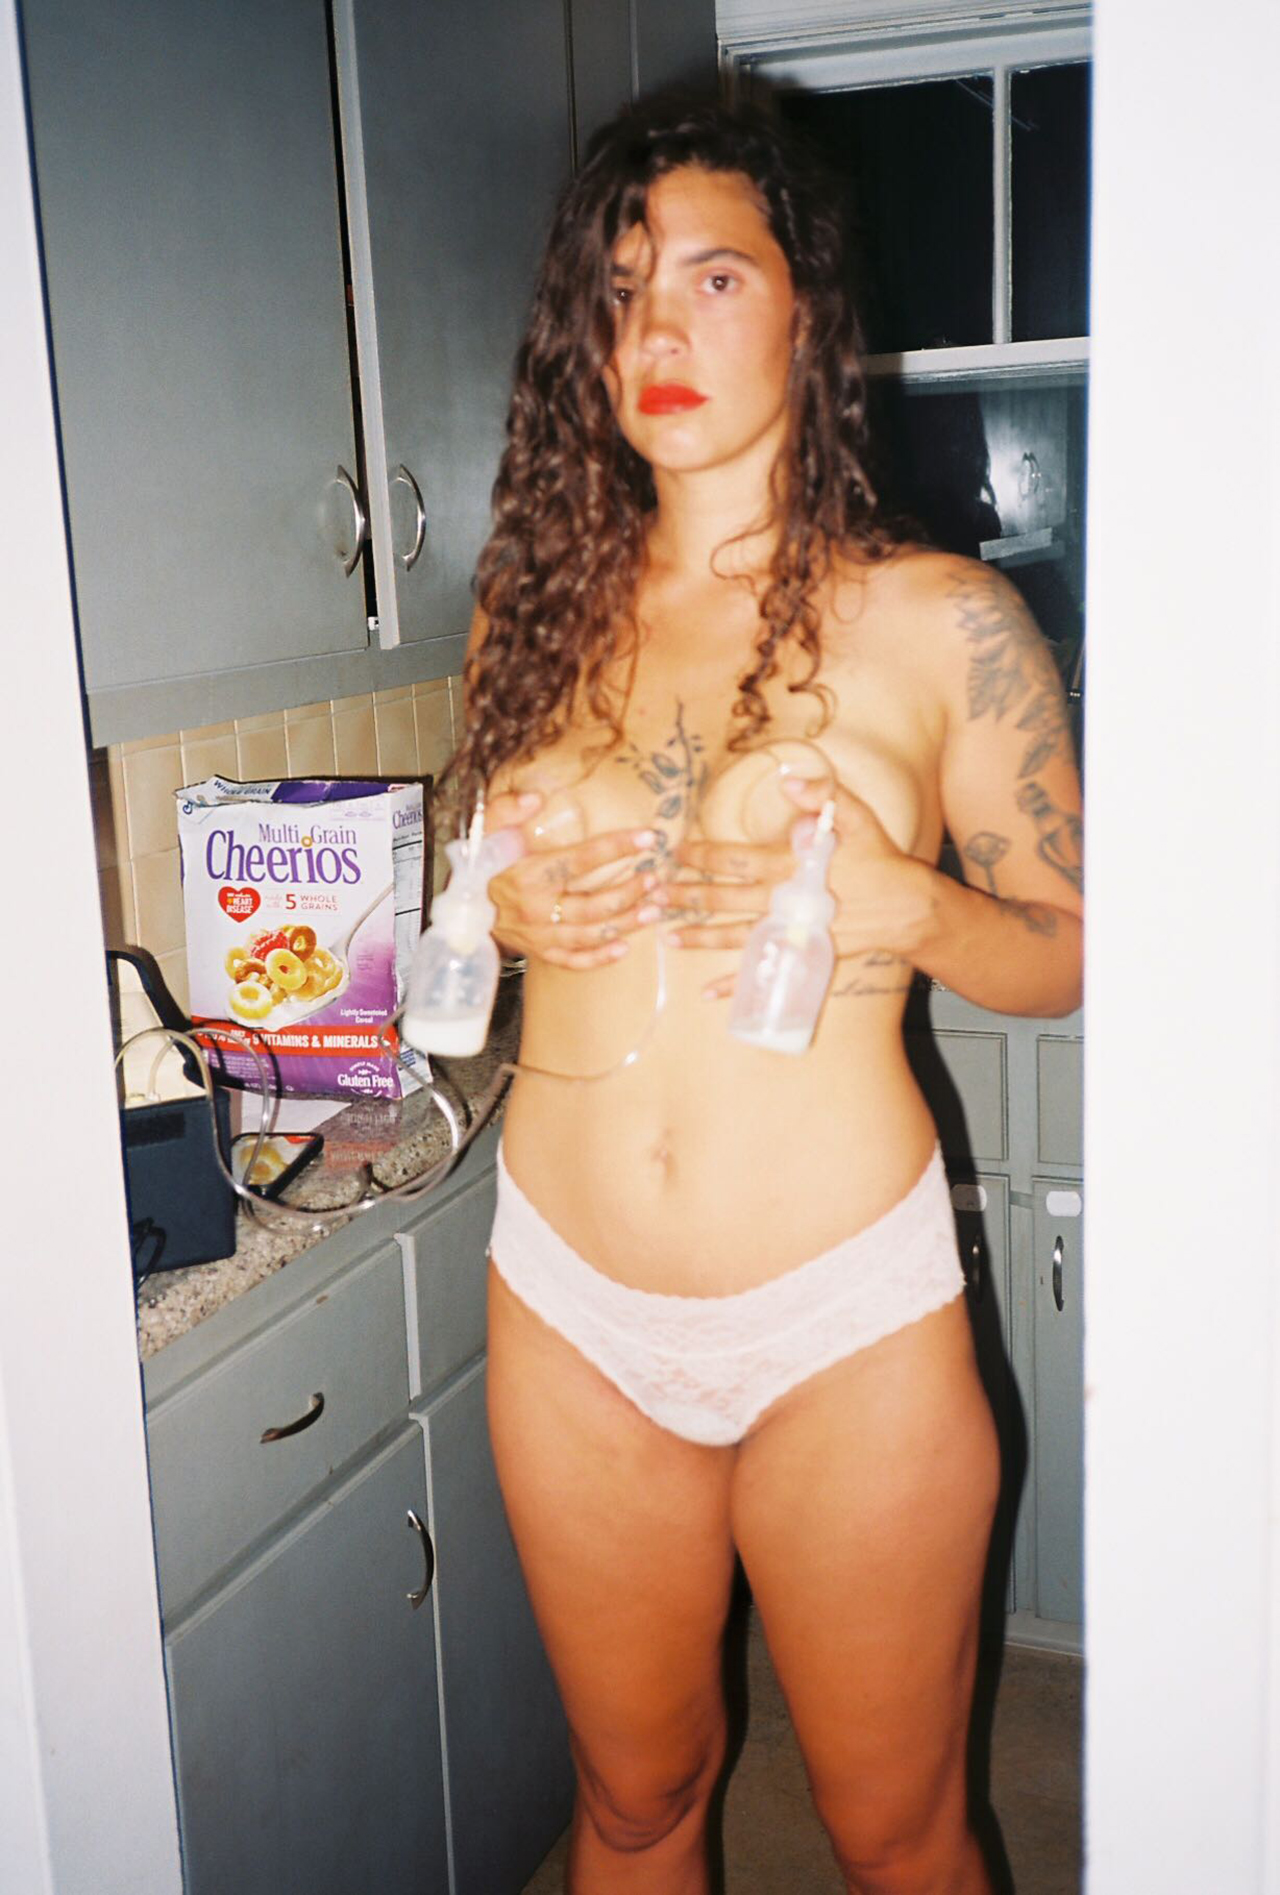 a woman is standing in her kitchen pumping breast milk with a box of Cheerios in the background from life after childbirth Coffee table book about the experience after childbirth